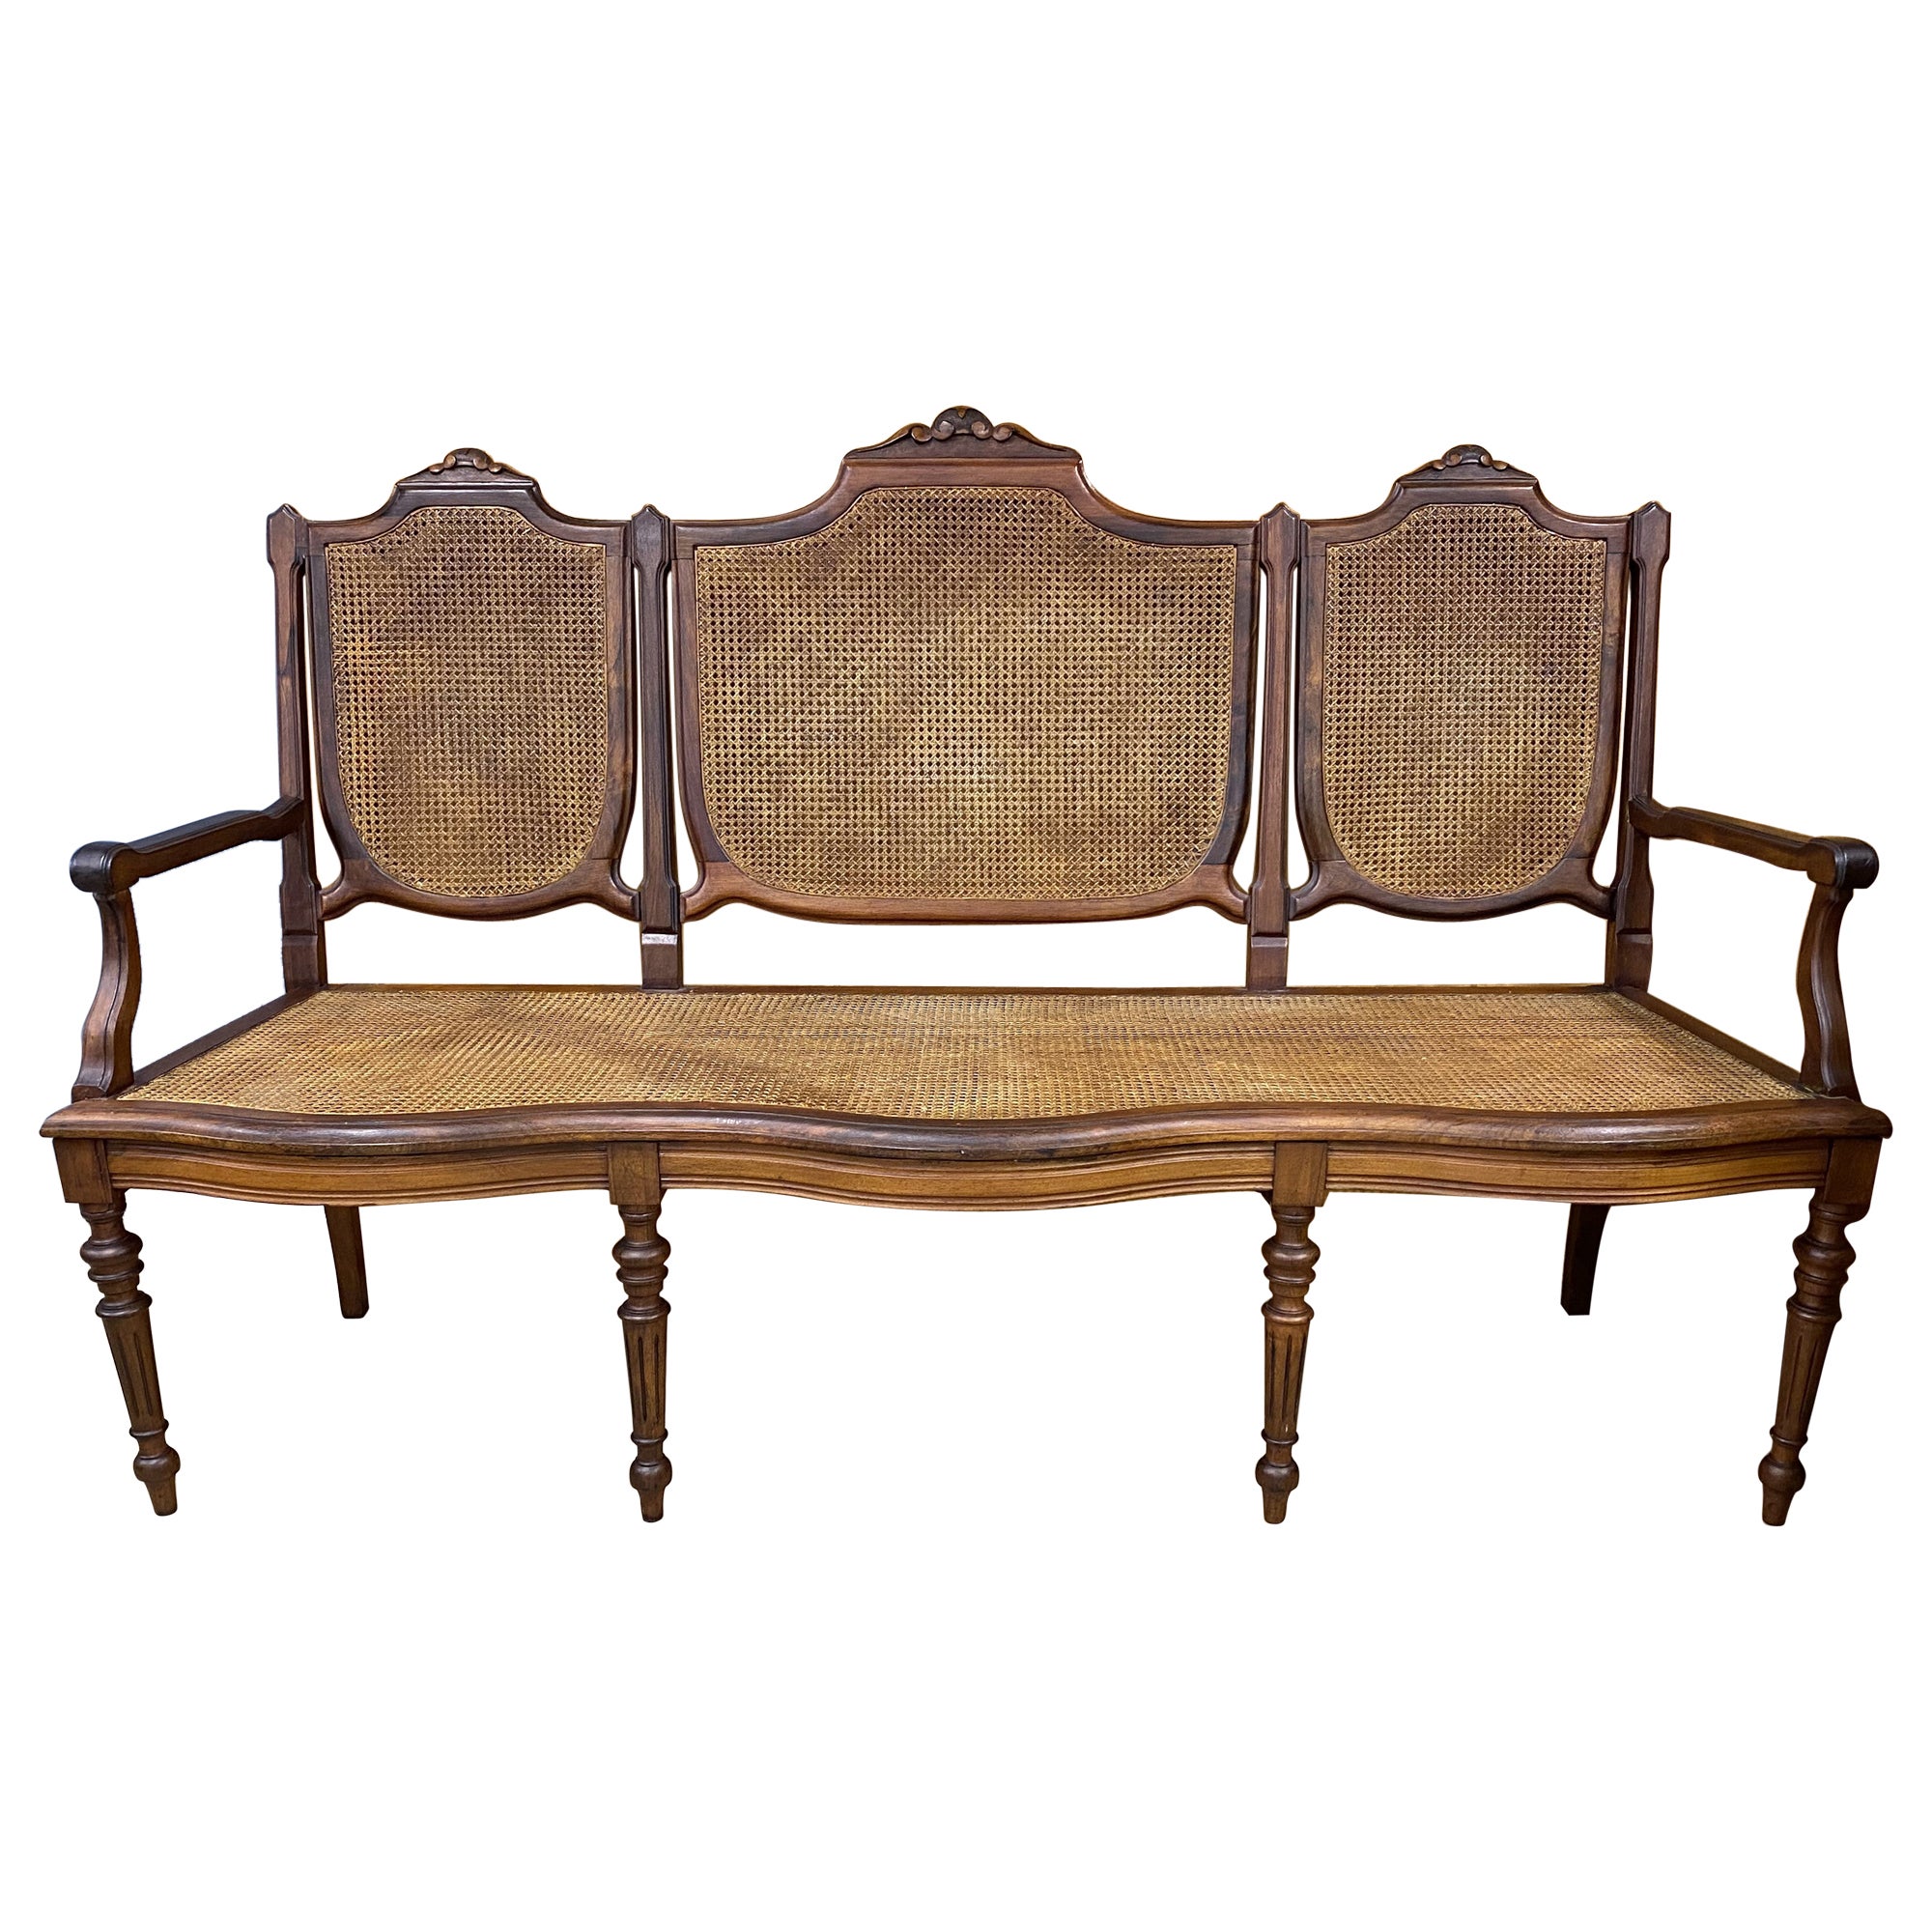 19th c Brazilian Hardwood Settee with Caned Seat and Back